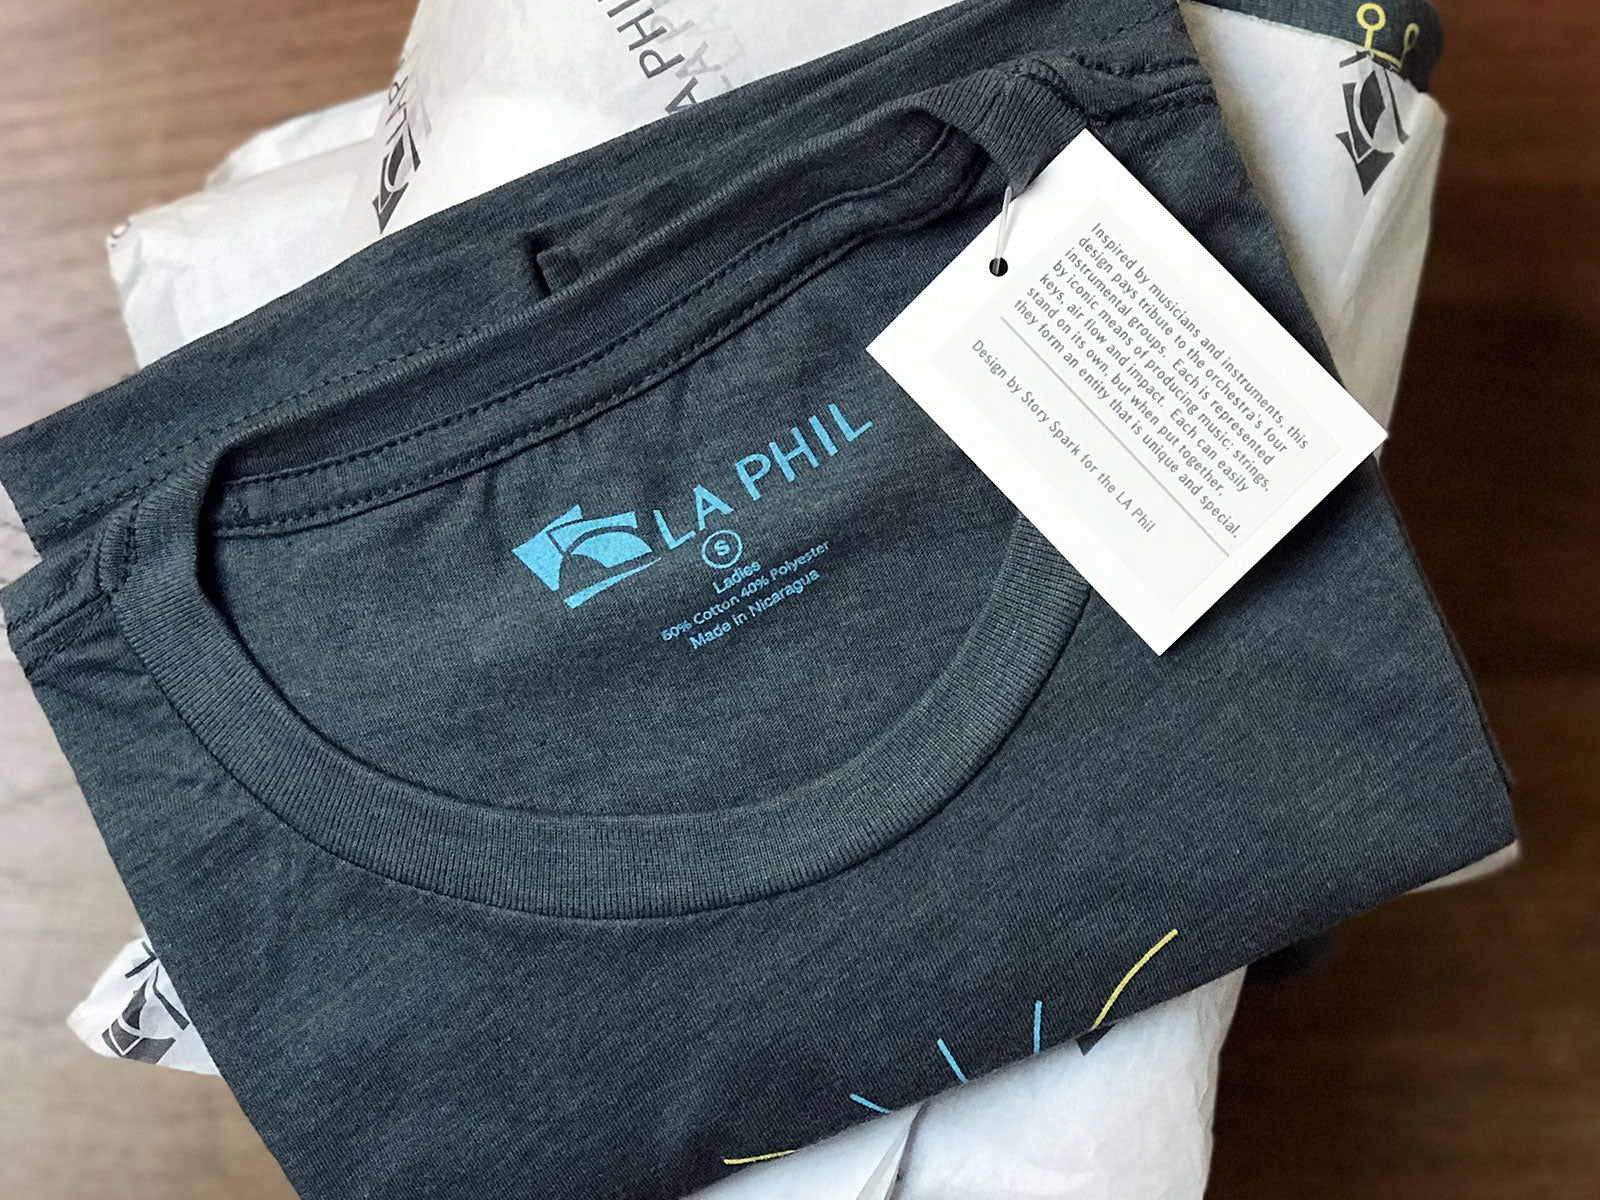 T-shirt designed by Story Spark for LA Phil